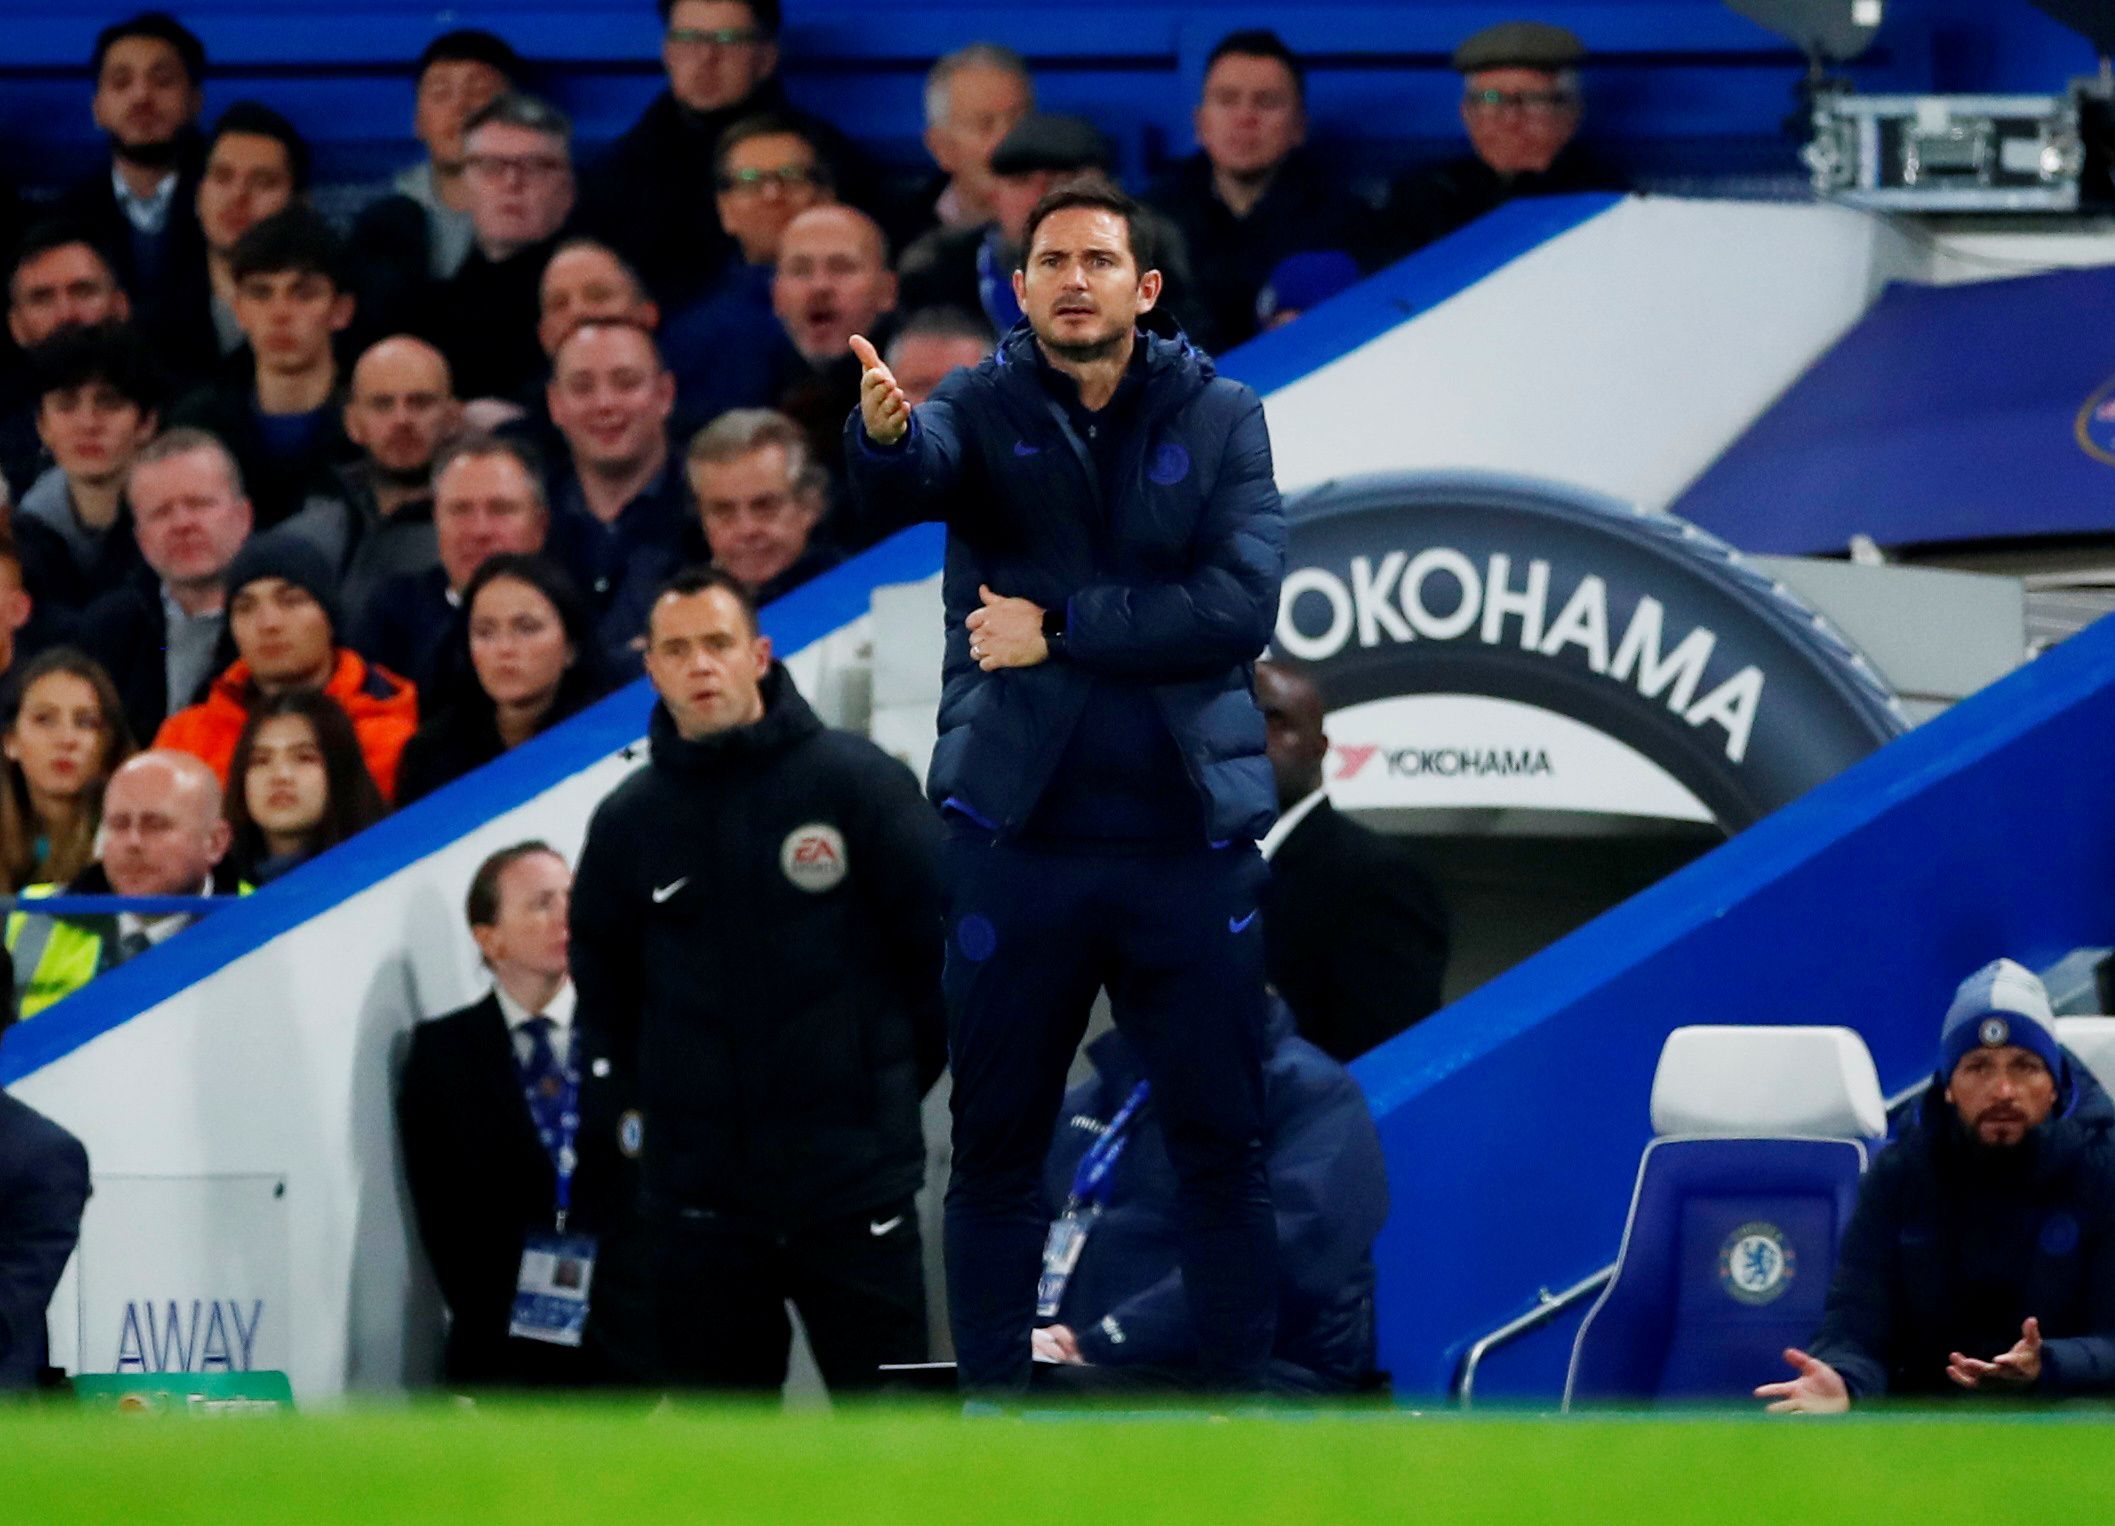 Soccer Football - Carabao Cup - Fourth Round - Chelsea v Manchester United - Stamford Bridge, London, Britain - October 30, 2019  Chelsea manager Frank Lampard reacts   REUTERS/Eddie Keogh  EDITORIAL USE ONLY. No use with unauthorized audio, video, data, fixture lists, club/league logos or 